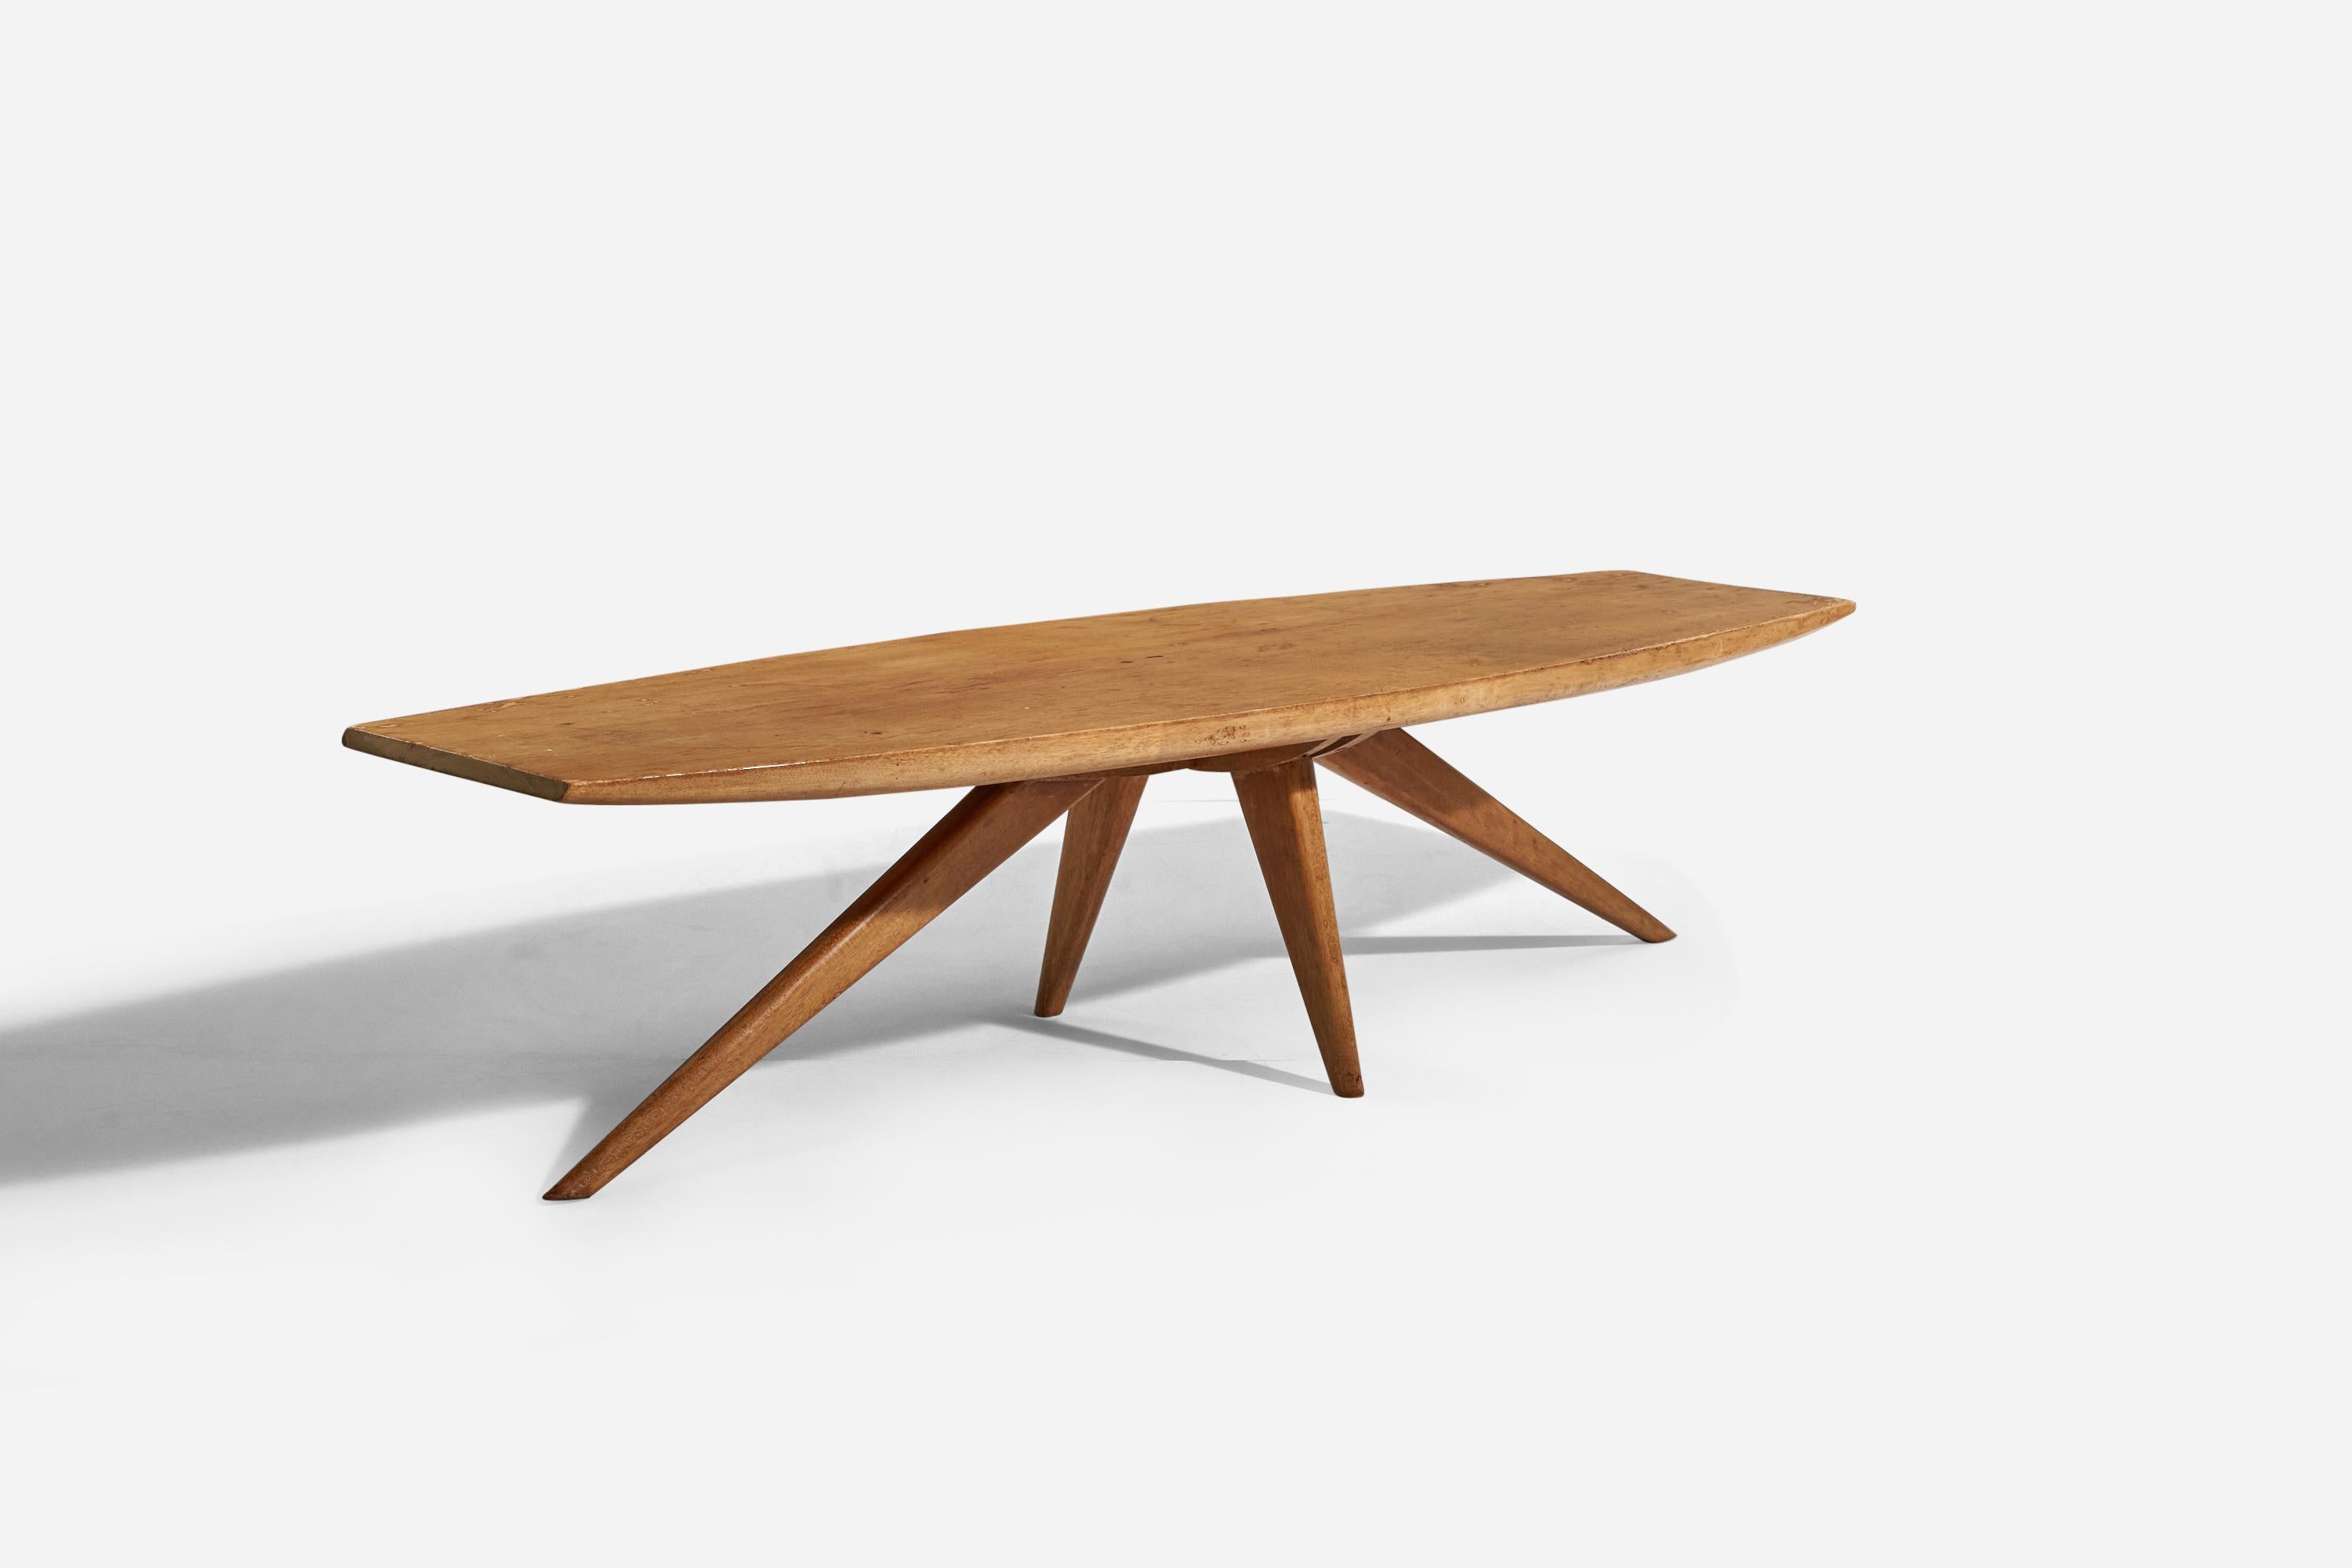 A wooden coffee table designed by Paul László and produced by Brown Saltman, America, 1950s.

